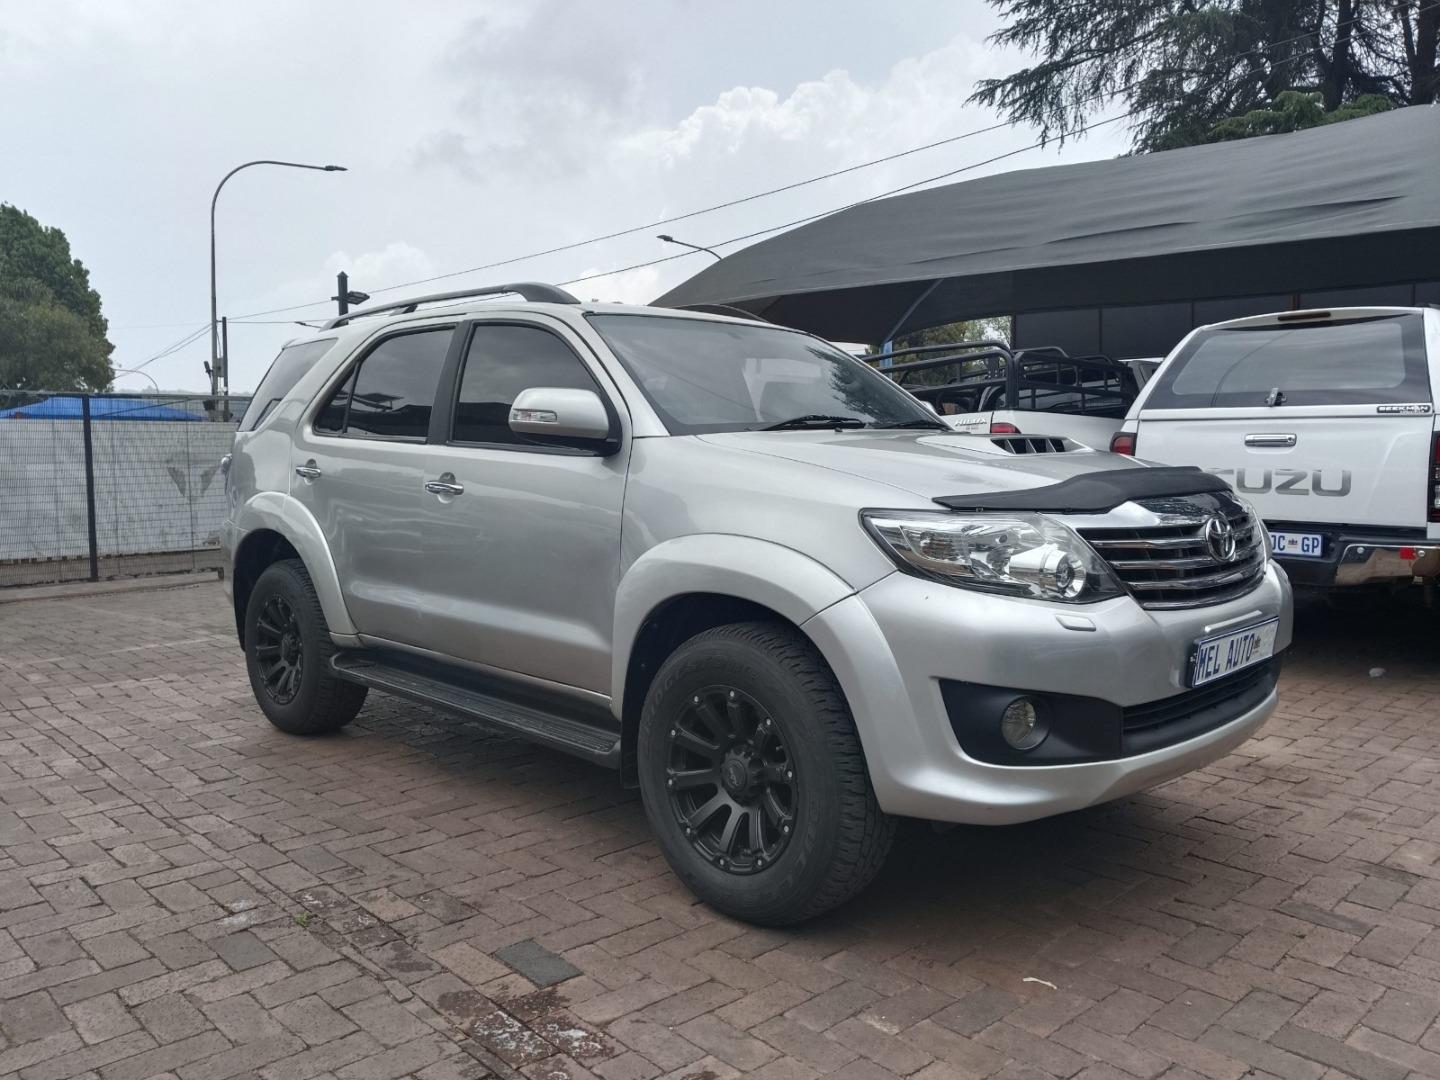 2015 Toyota Fortuner 3.0D-4D 4x4 auto For Sale